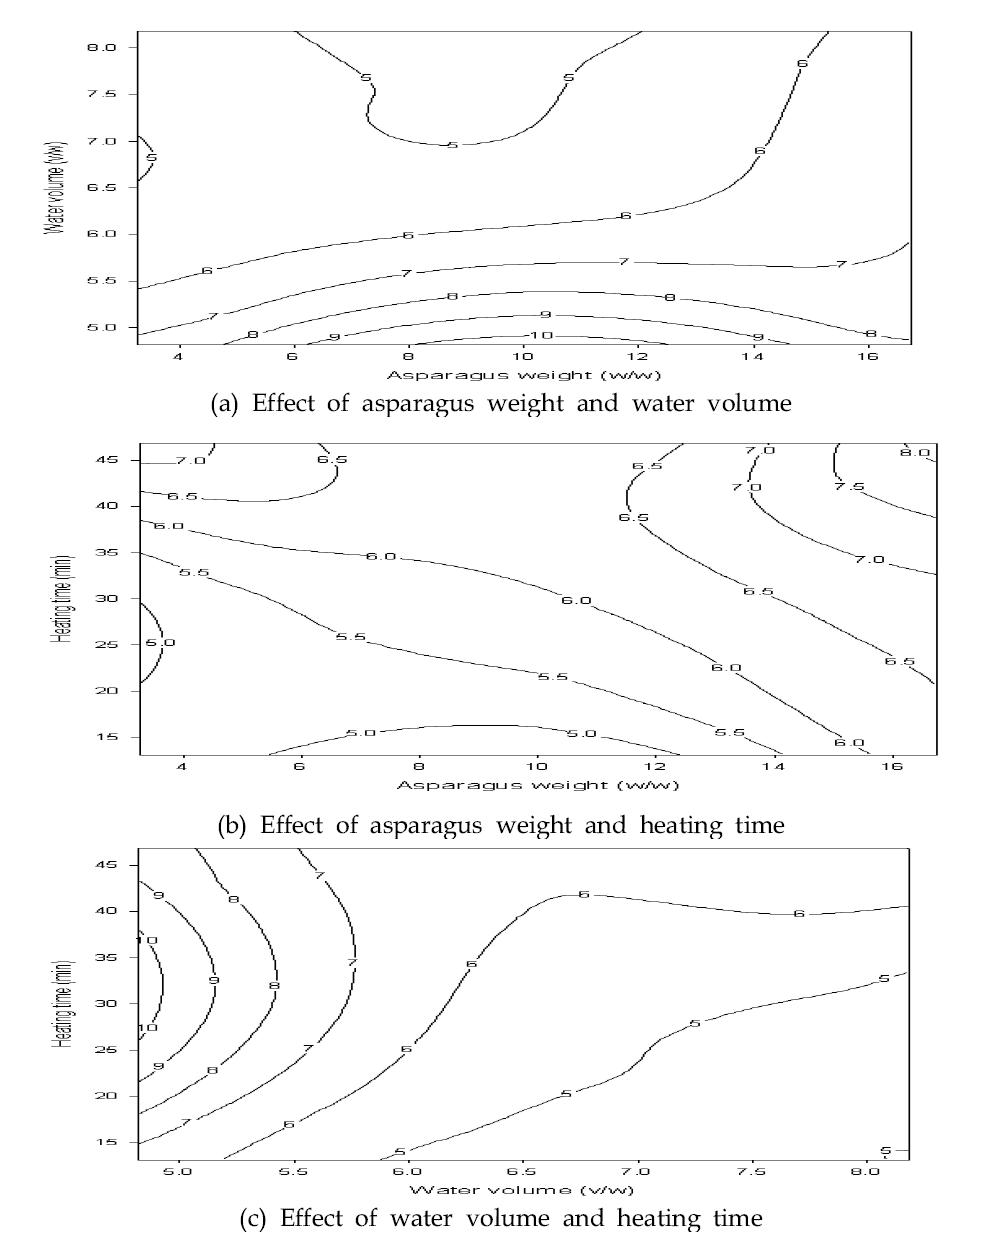 Contour plots of total sugar in manufacturing asparagus porridge. (a) Effect of asparagus weight and water volume (b) Effect of asparagus weight and heating time (c) Effect of water volume and heating time